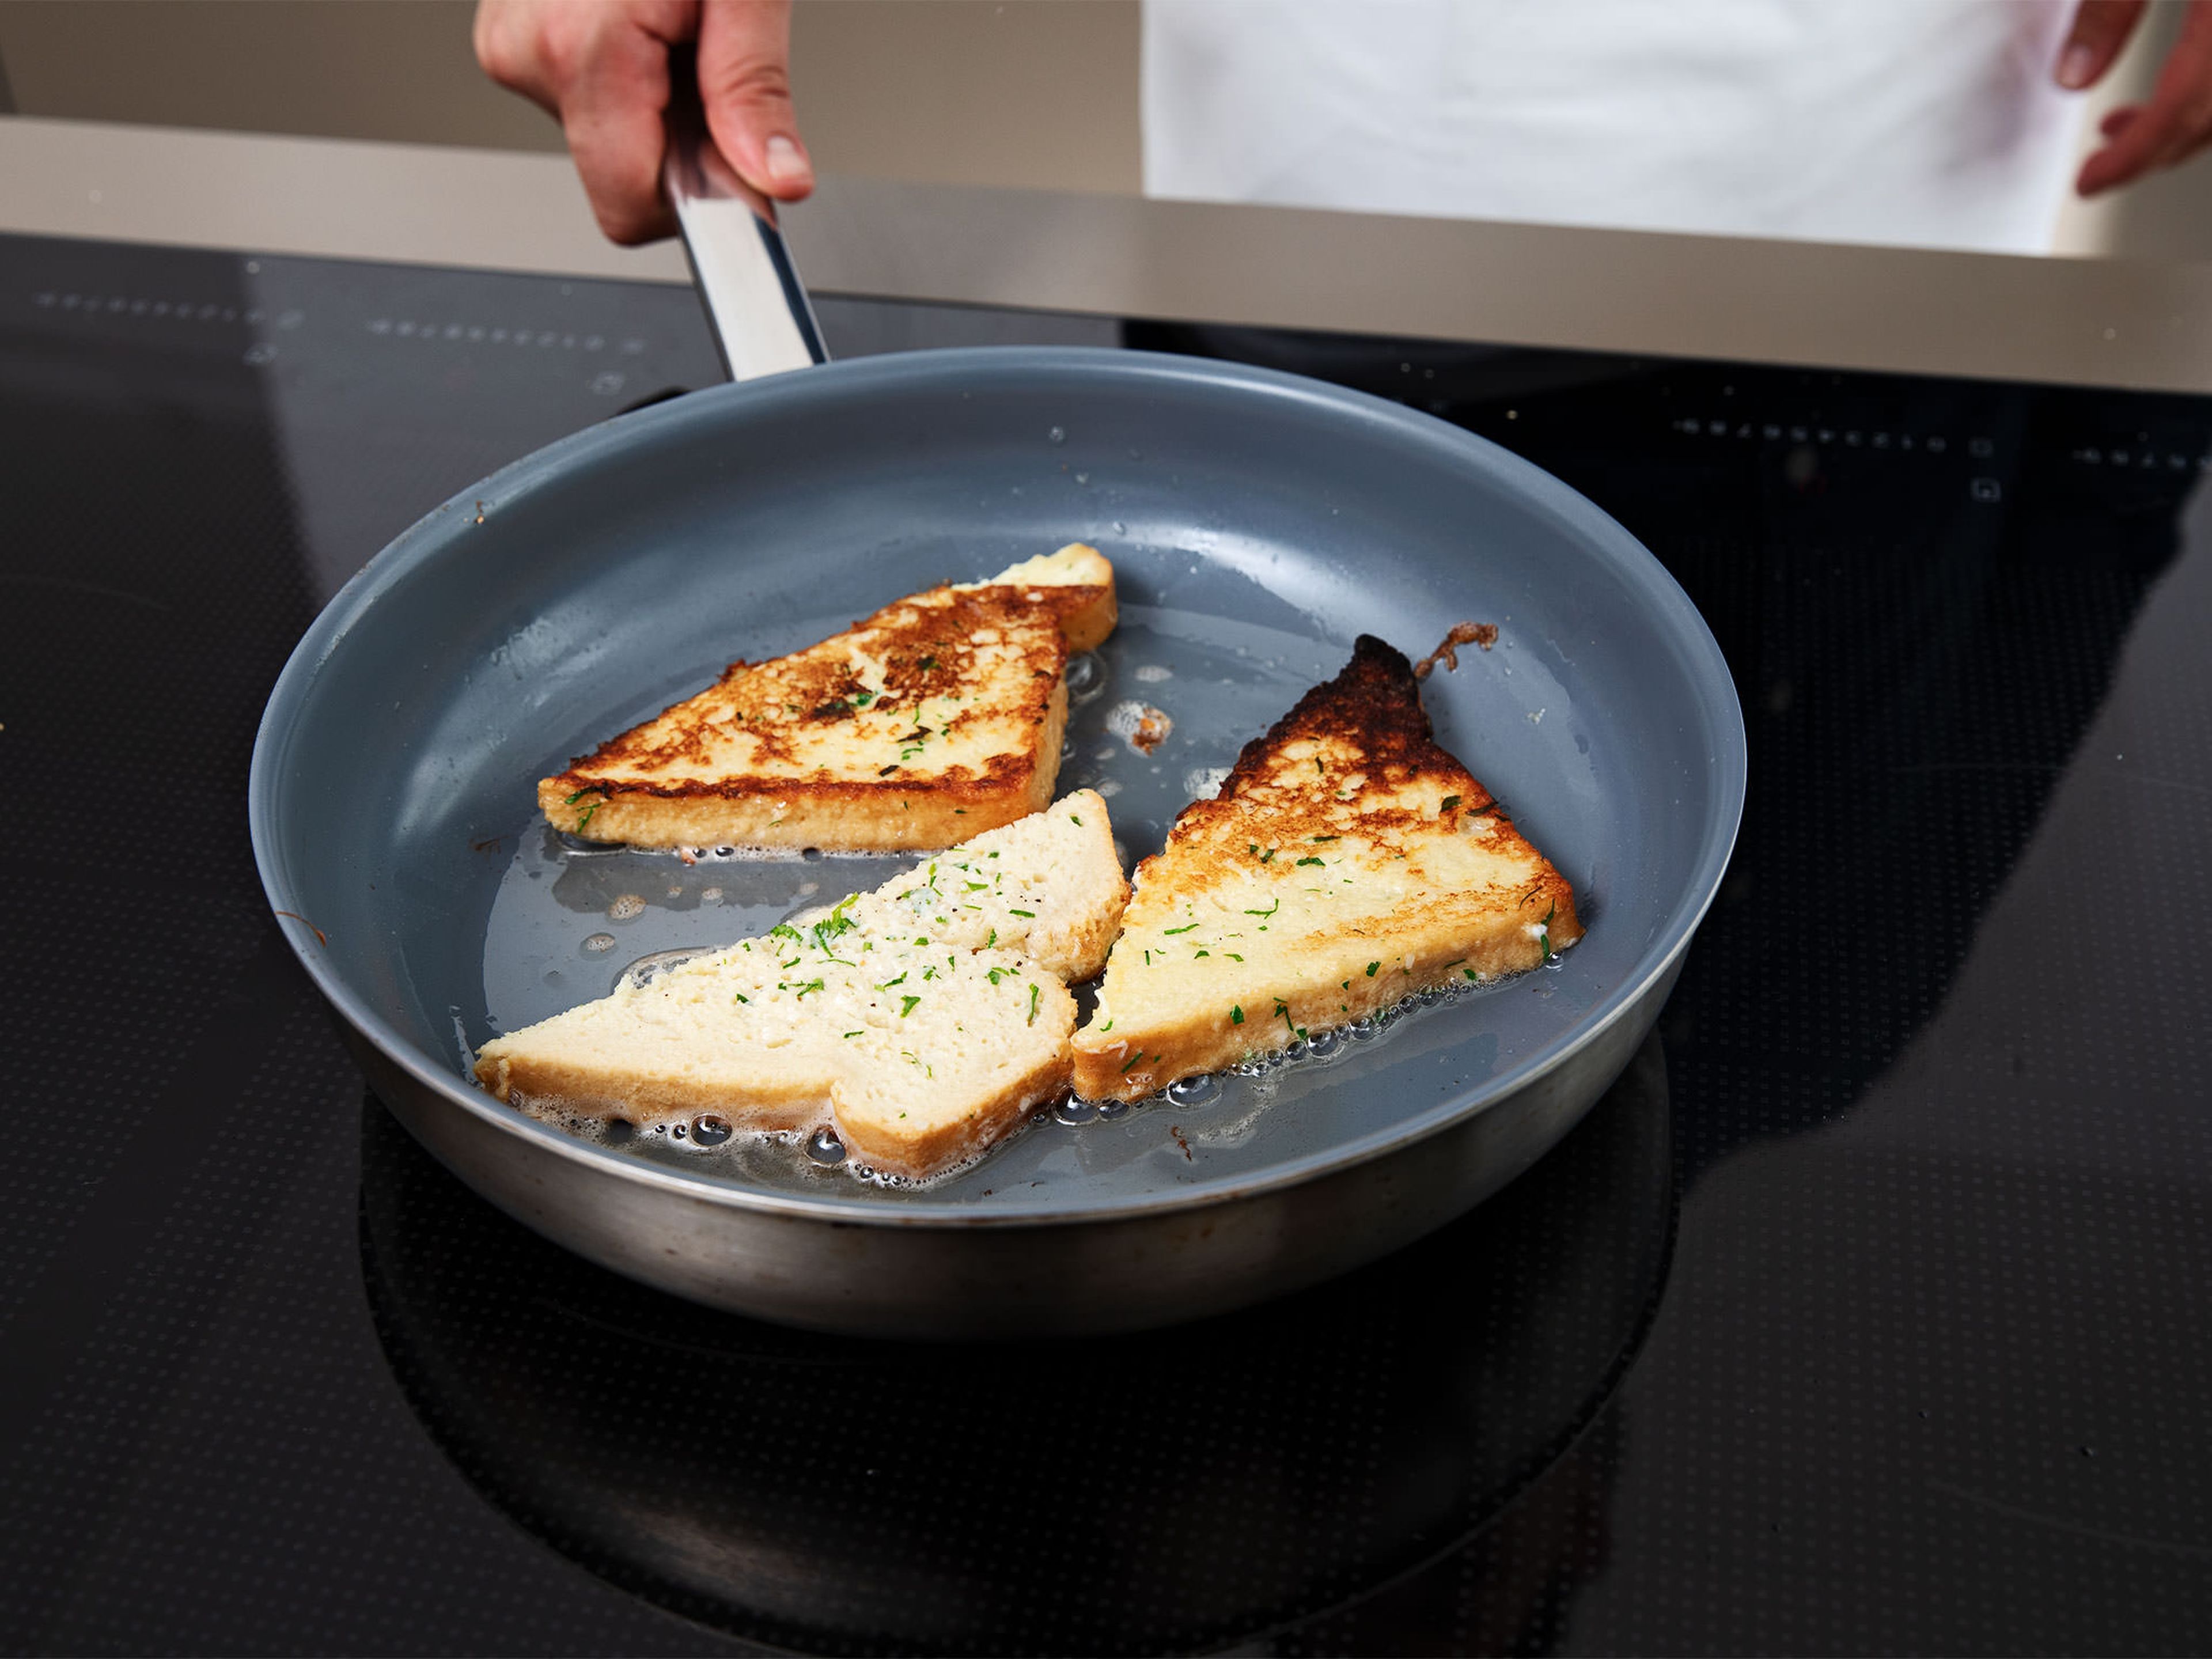 Add butter to a frying pan set over medium heat-high heat. Add bread slices to pan, and fry on both sides until golden. Season with pepper and serve straight away while hot. Enjoy!